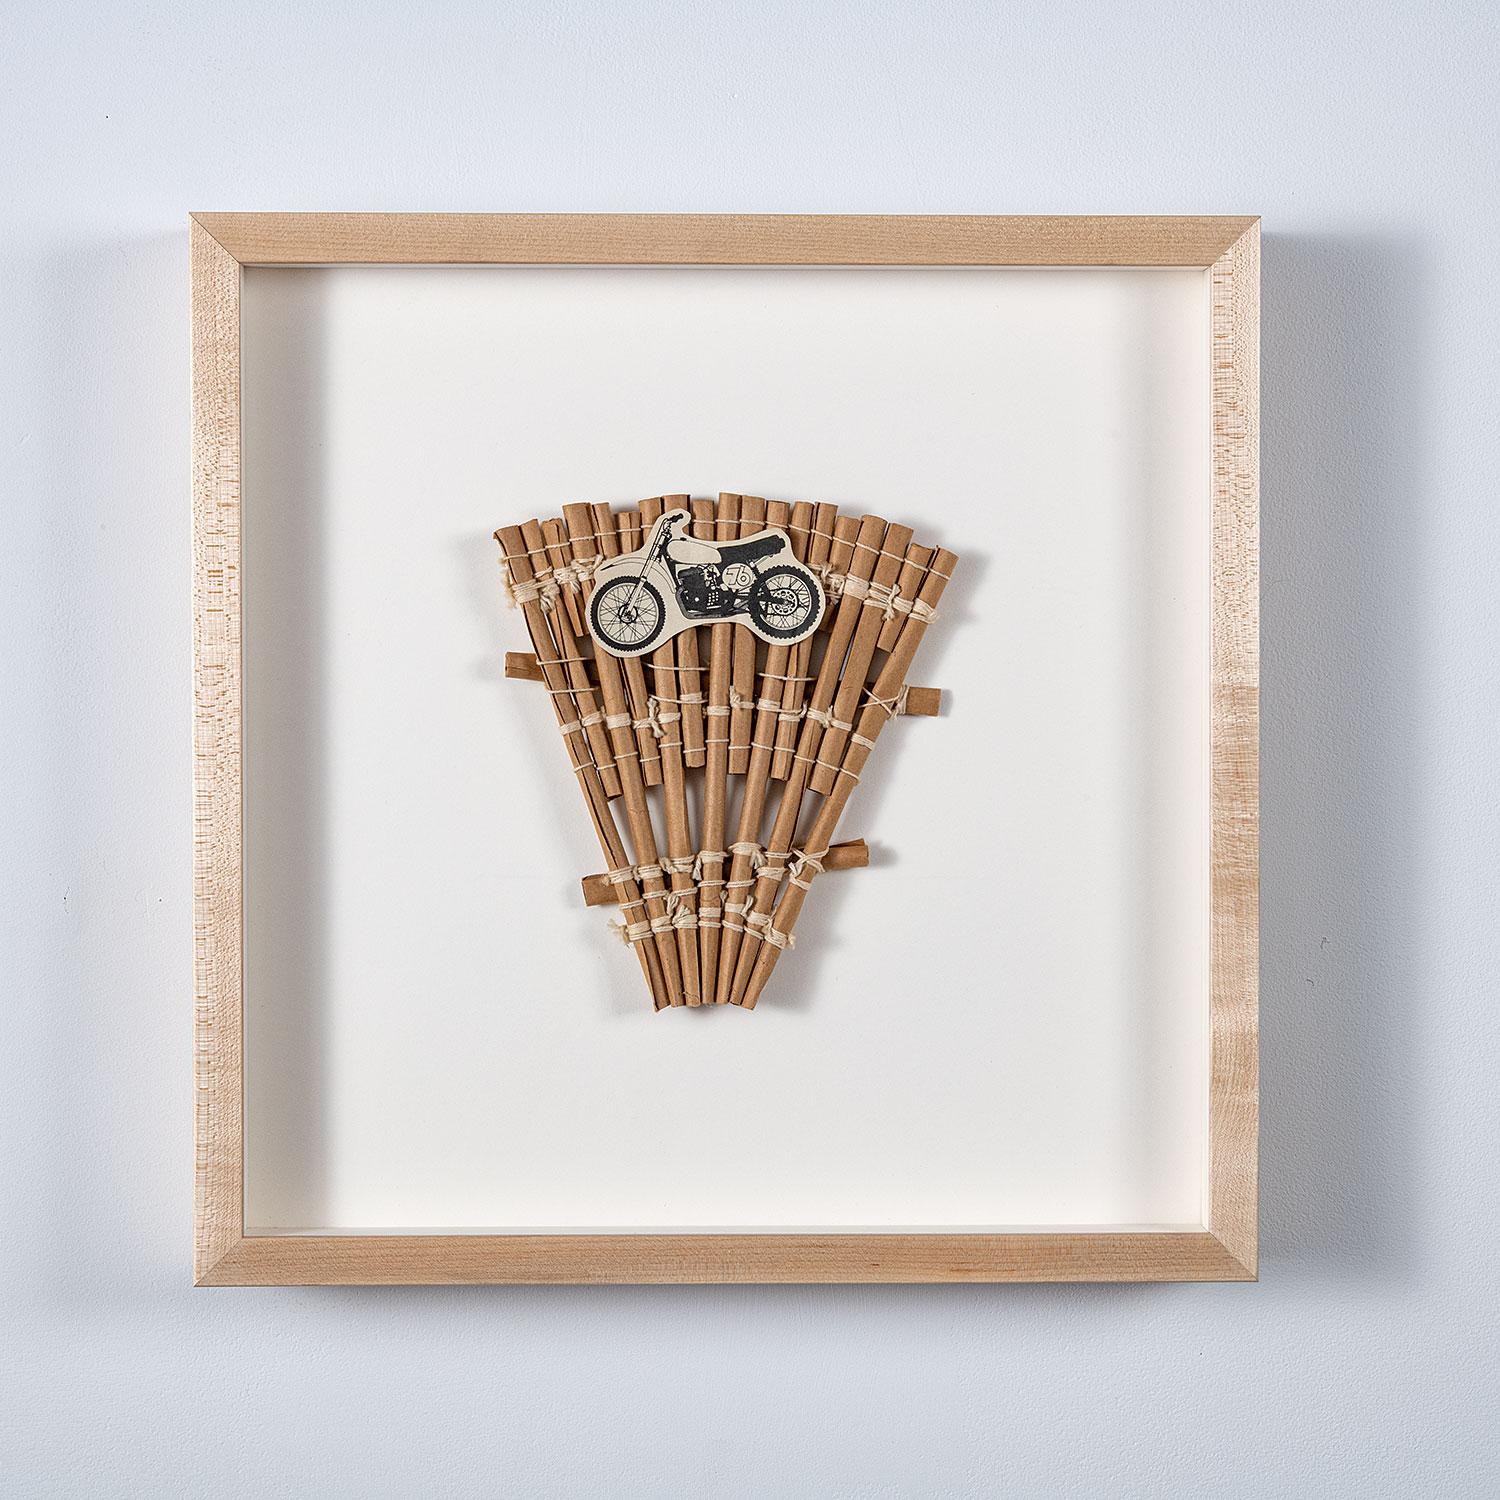 Ed Rossbach was known for experimenting by using unexpected materials and symbols in his baskets, vessels, and assemblages including plastic, cotton balls, cardboard and iconic images. In Staplers, he has woven, sculpted, and collaged together paper